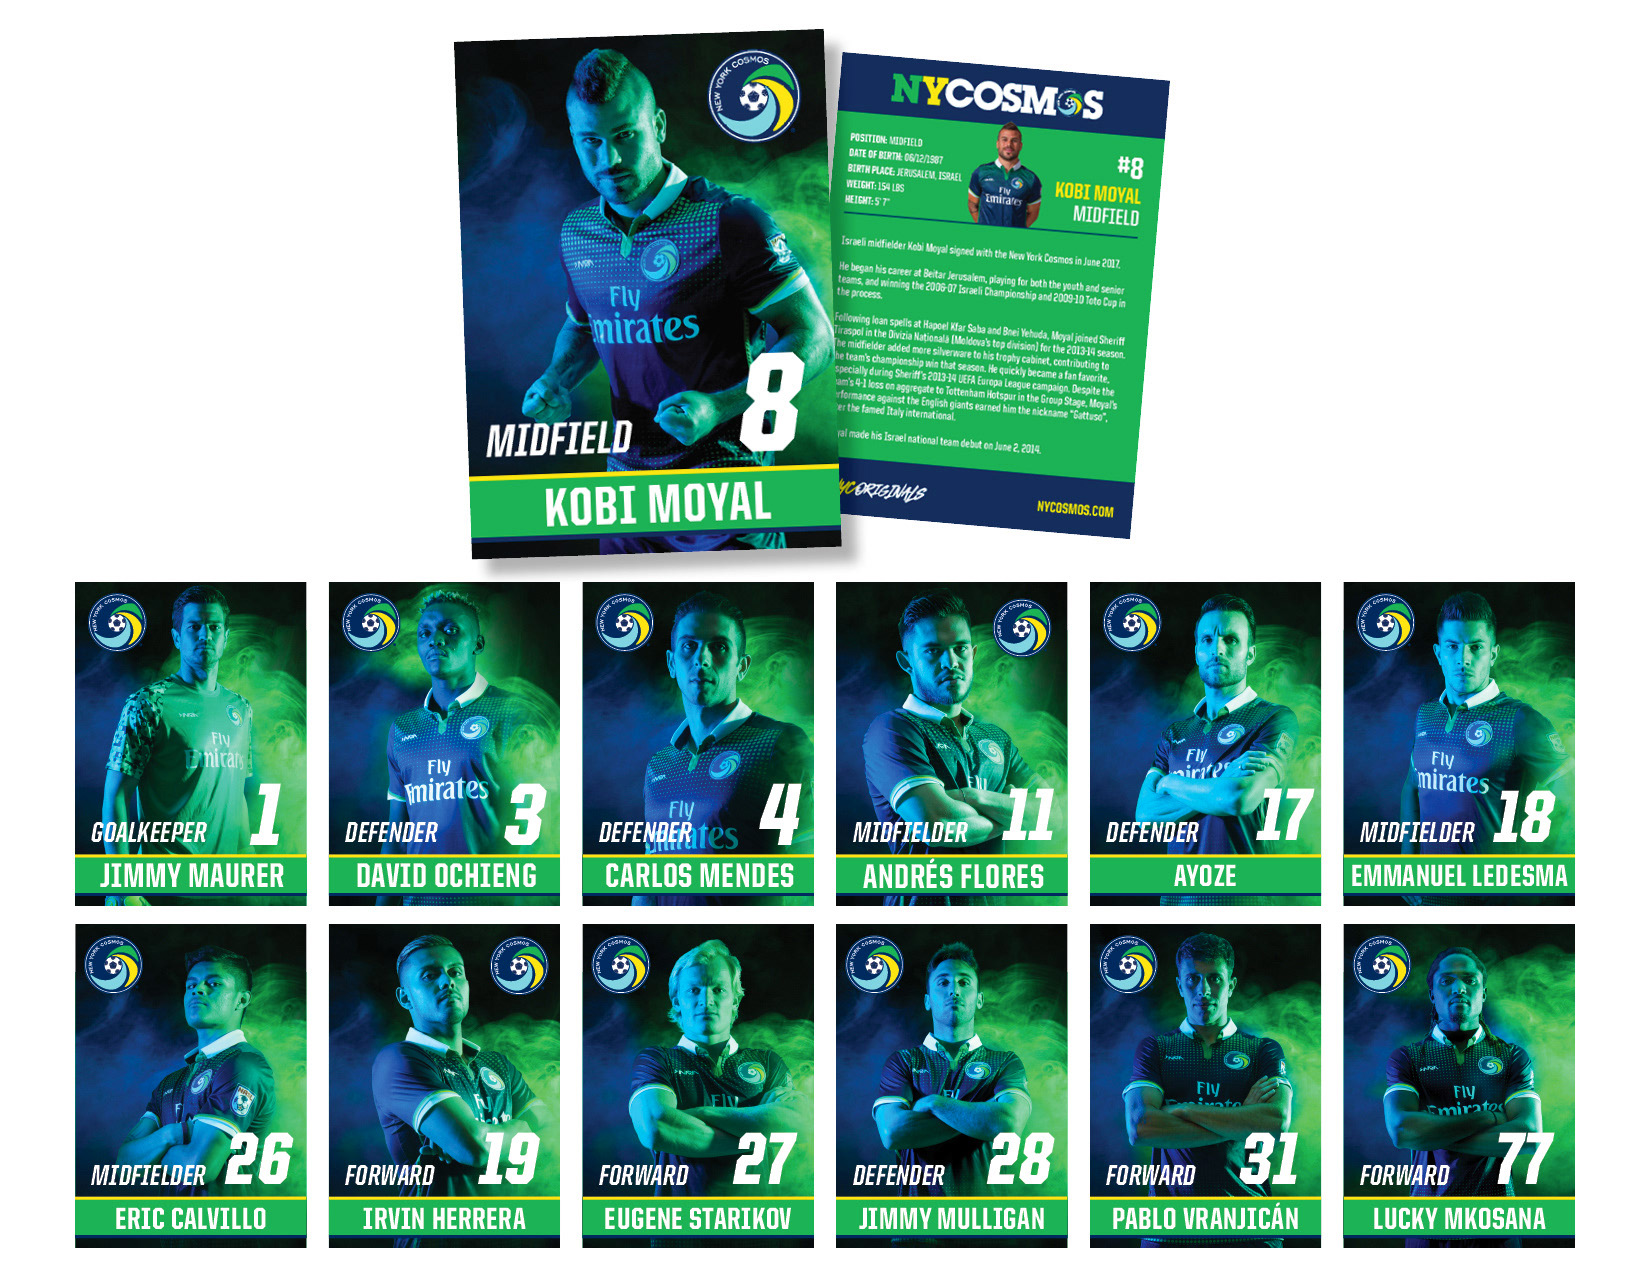 nycosmos4